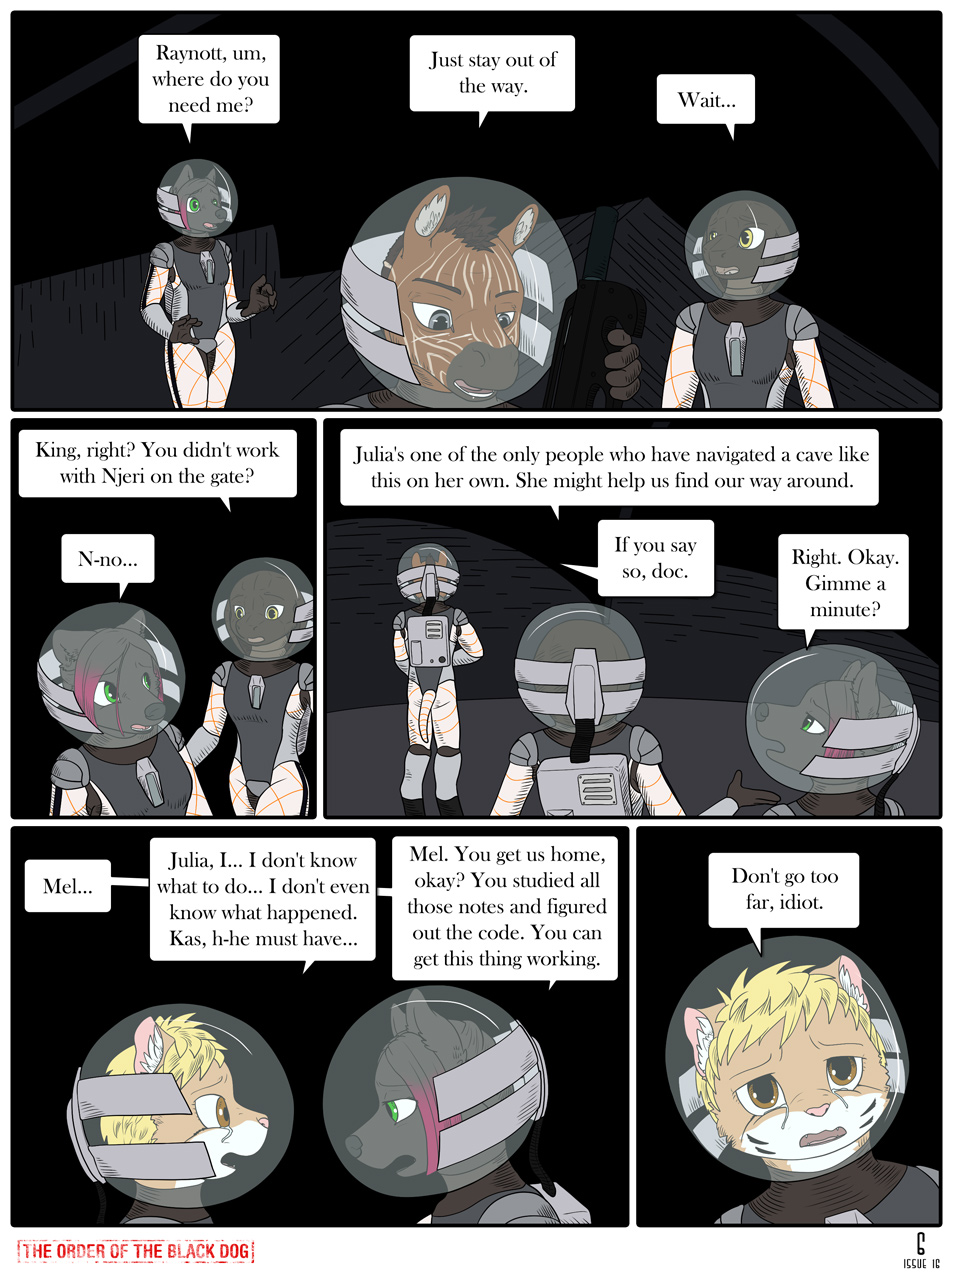 Issue 16, Page 6